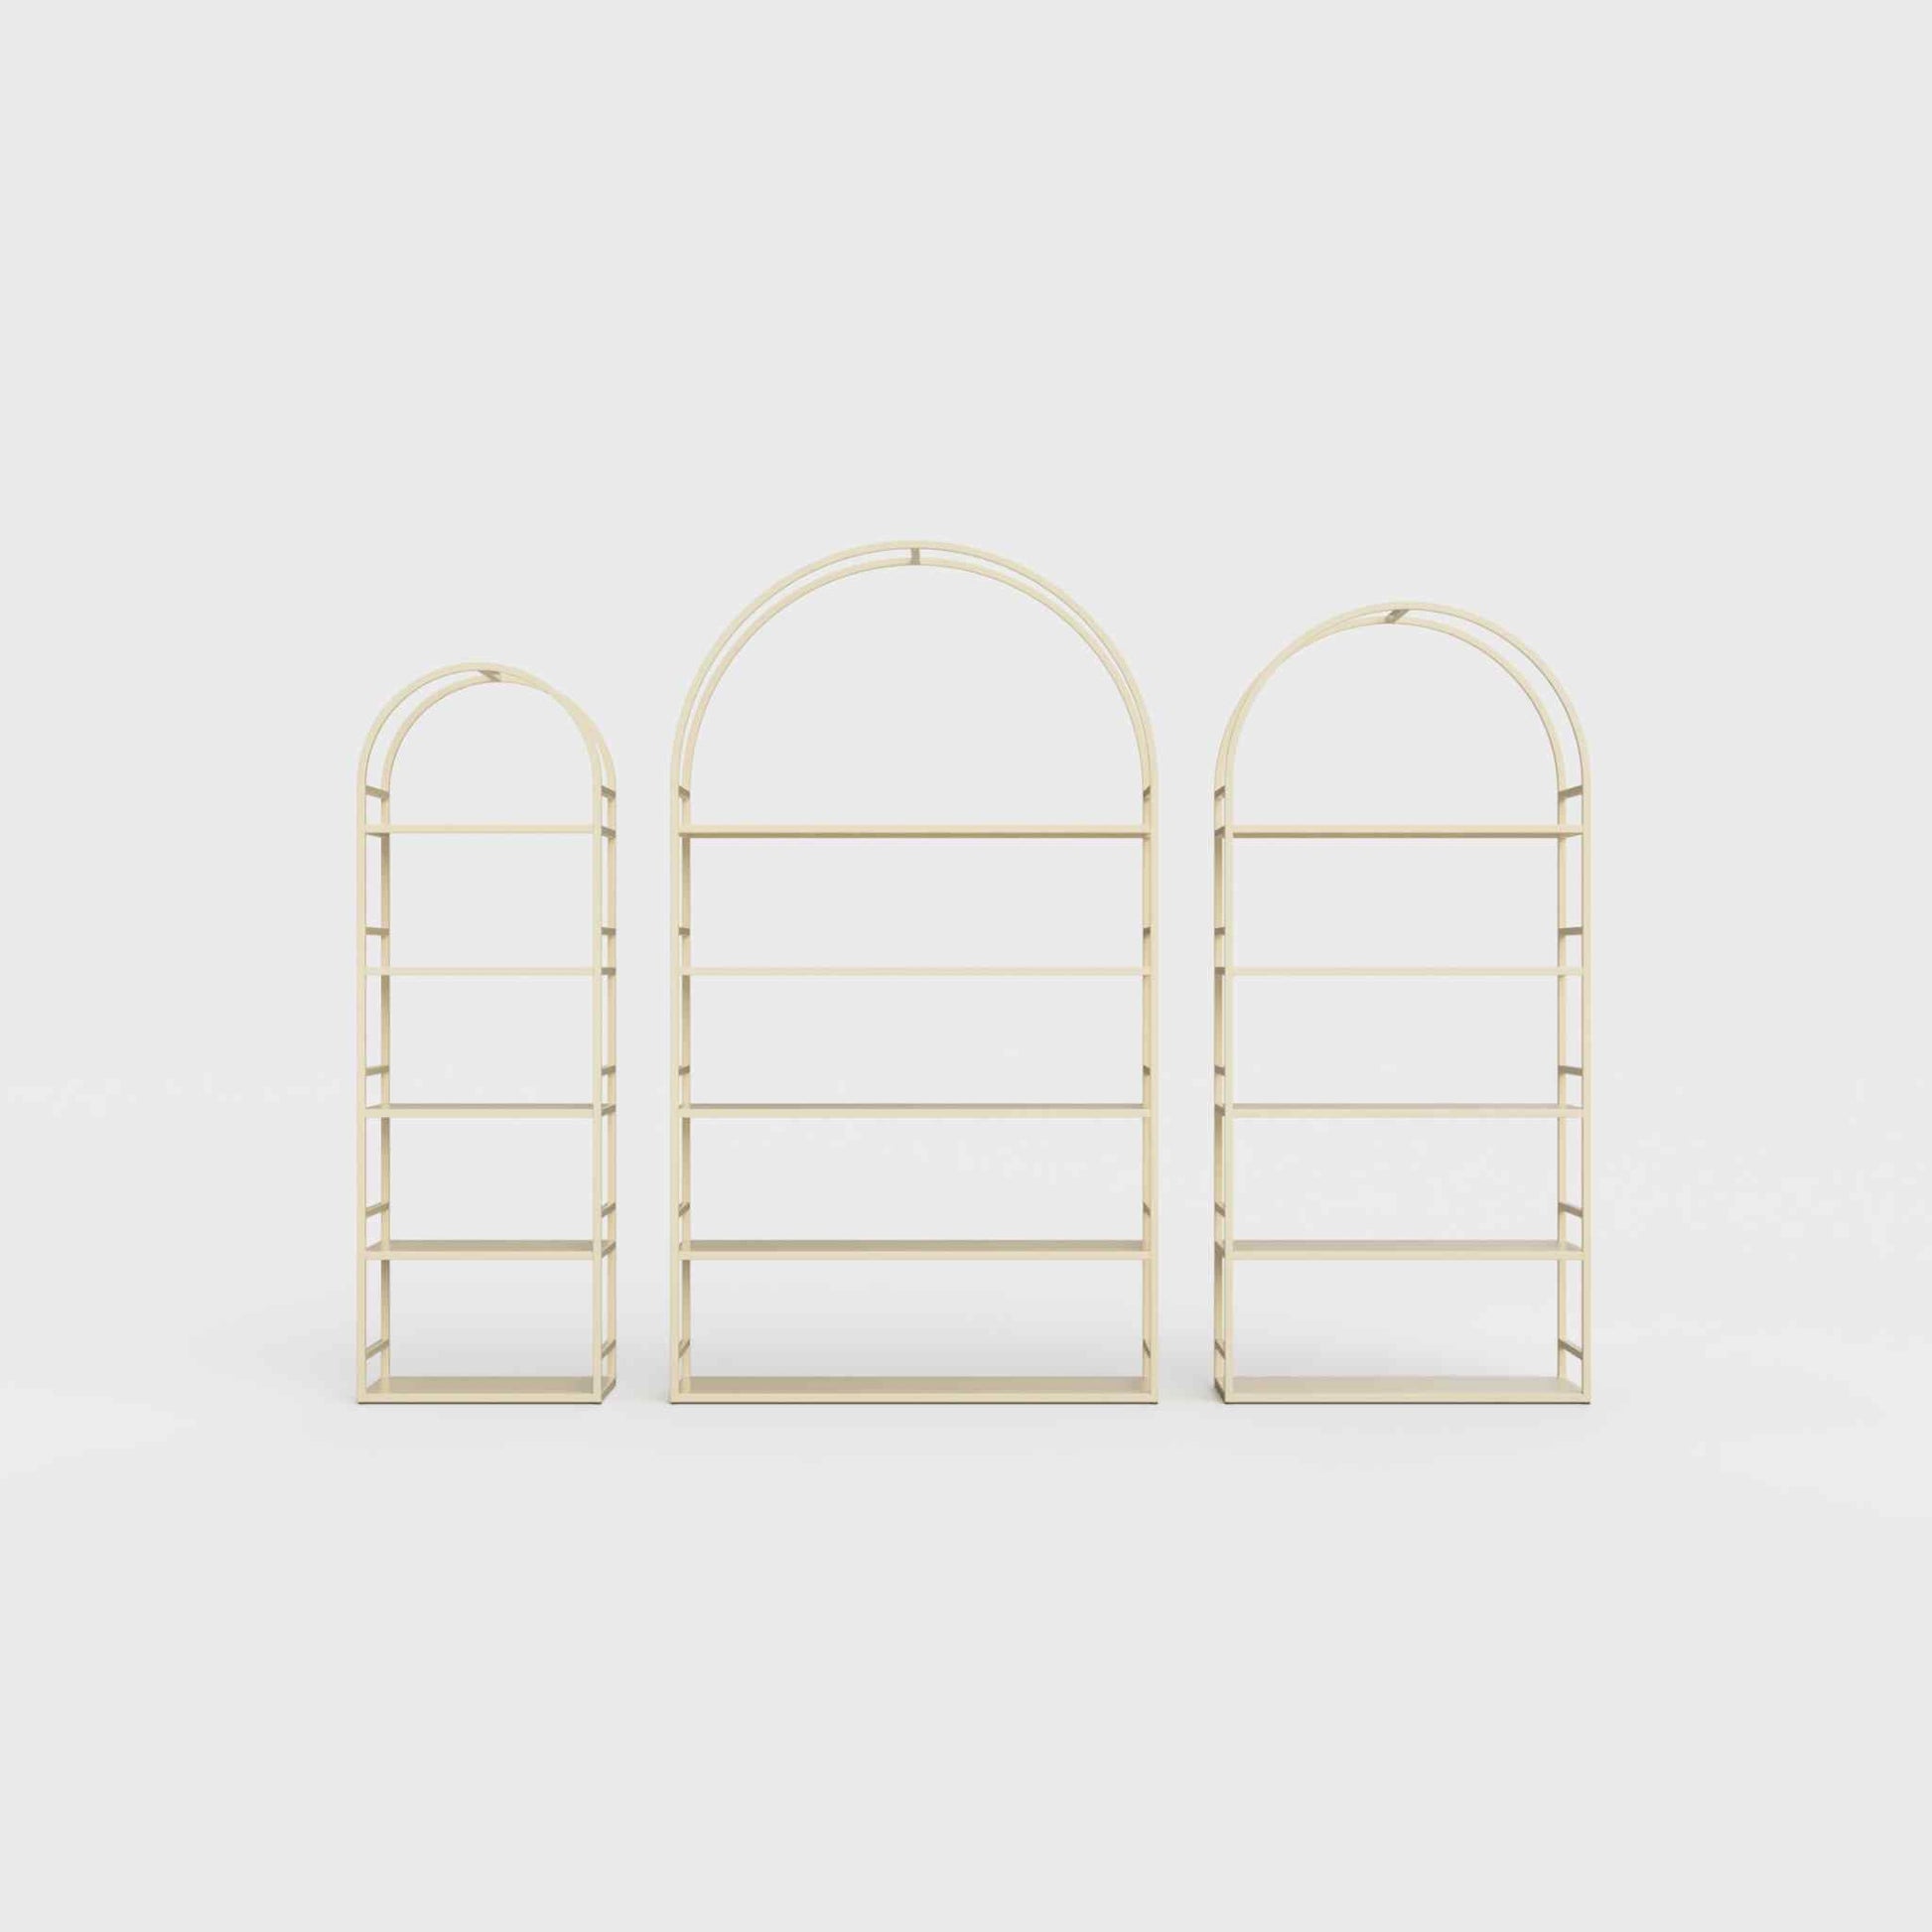 Arched bookcase Arkada, available in Switzerland through ÉTAUDORÉ, made from highest quality powdered coated steel in sand color